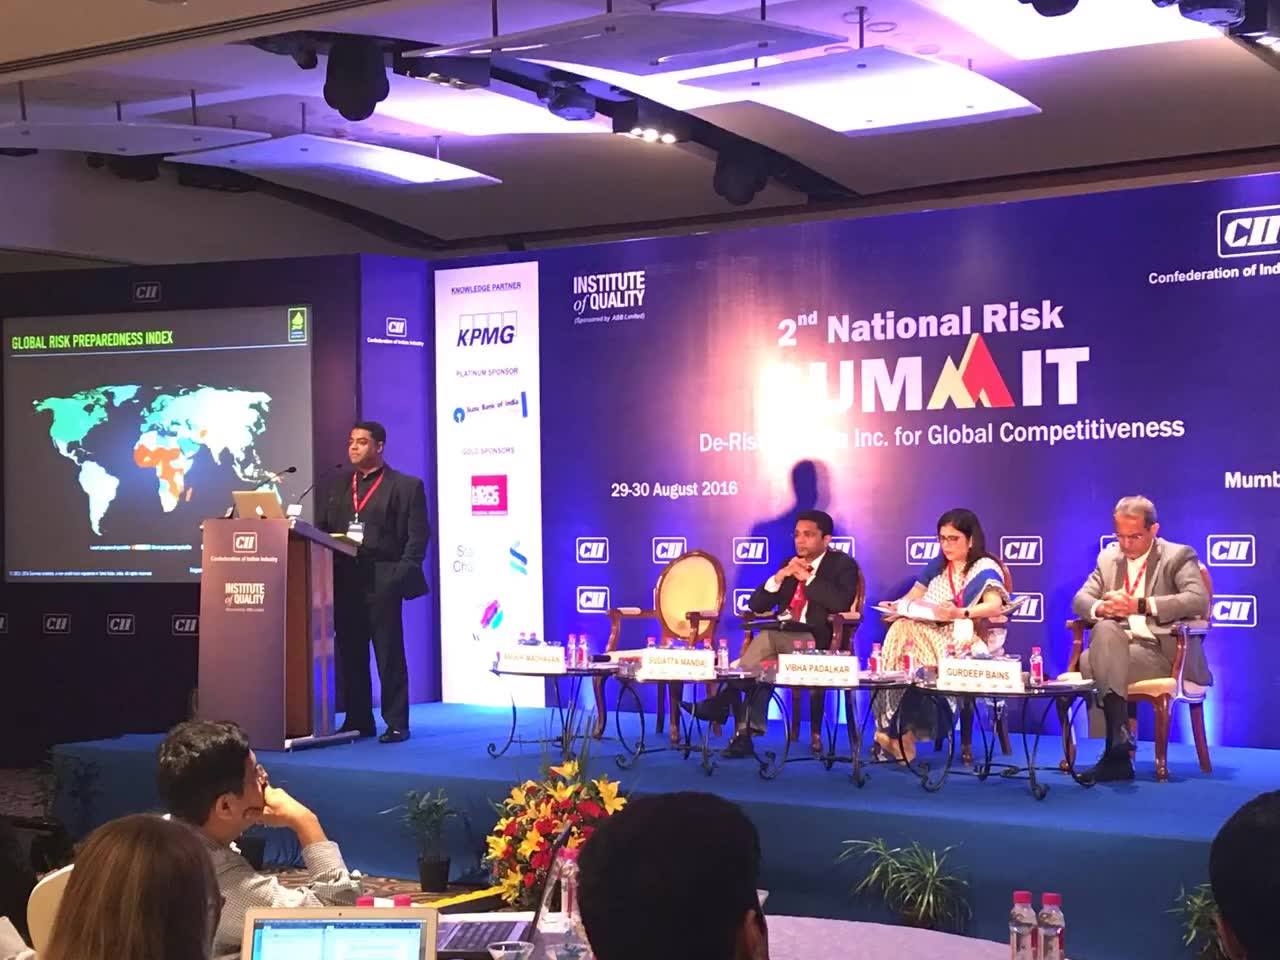 Anoop Madhavan, the founder of Survival Instincts was recently invited as a speaker to Confederation of Indian Industry (CII) Annual Risk Summit 2016. He provided an insightful lecture on risk management and how it can be used for better decision making in business operations. Mr. Madhavan discussed about various strategies organizations should adopt while dealing with risks related to their businesses such as financial loss or operational disruption due to external factors like economic downturns or natural disasters etc., His ideas were well received by all present at the summit who appreciated his knowledge and experience in this field. It is through events like these that we are able get valuable insights into managing our day to day activities more efficiently which will ultimately lead us towards success!